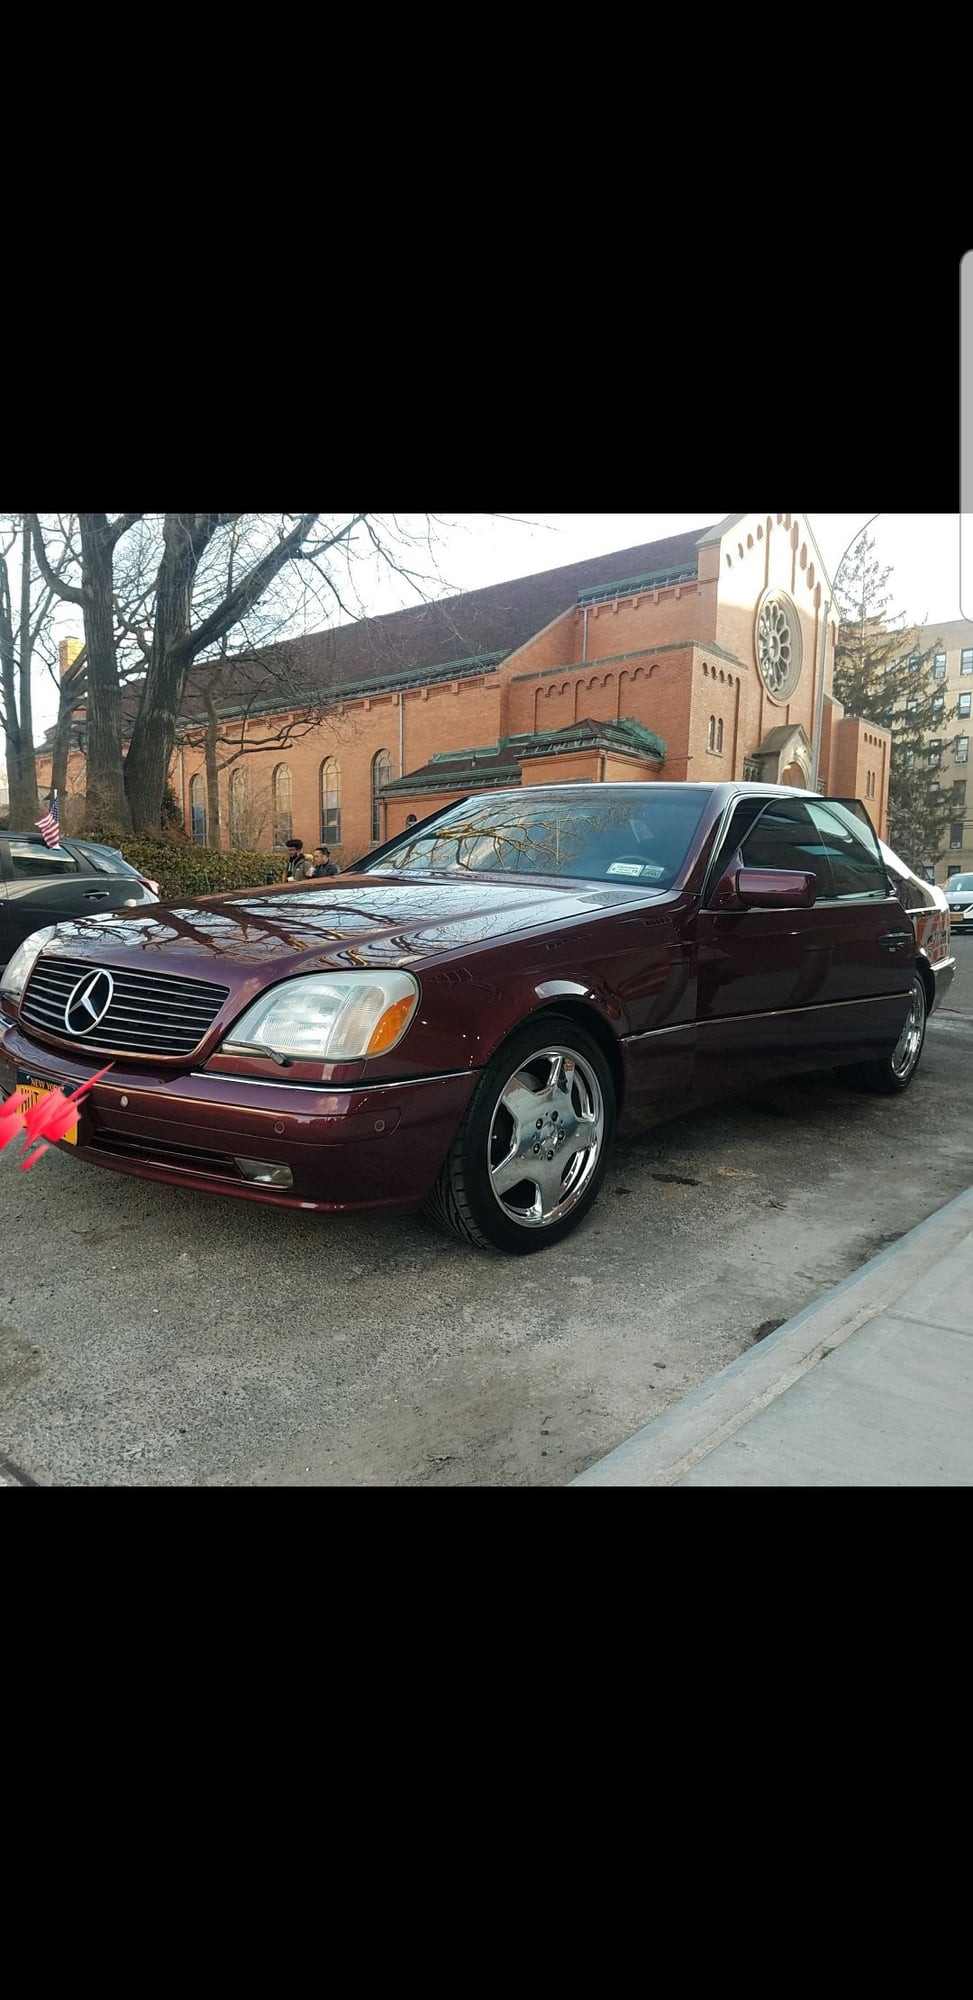 1999 Mercedes-Benz CL500 - Clean - Used - VIN 00000000000000000 - 44,000 Miles - 8 cyl - 2WD - Automatic - Coupe - Red - Pelham, NY 10465, United States